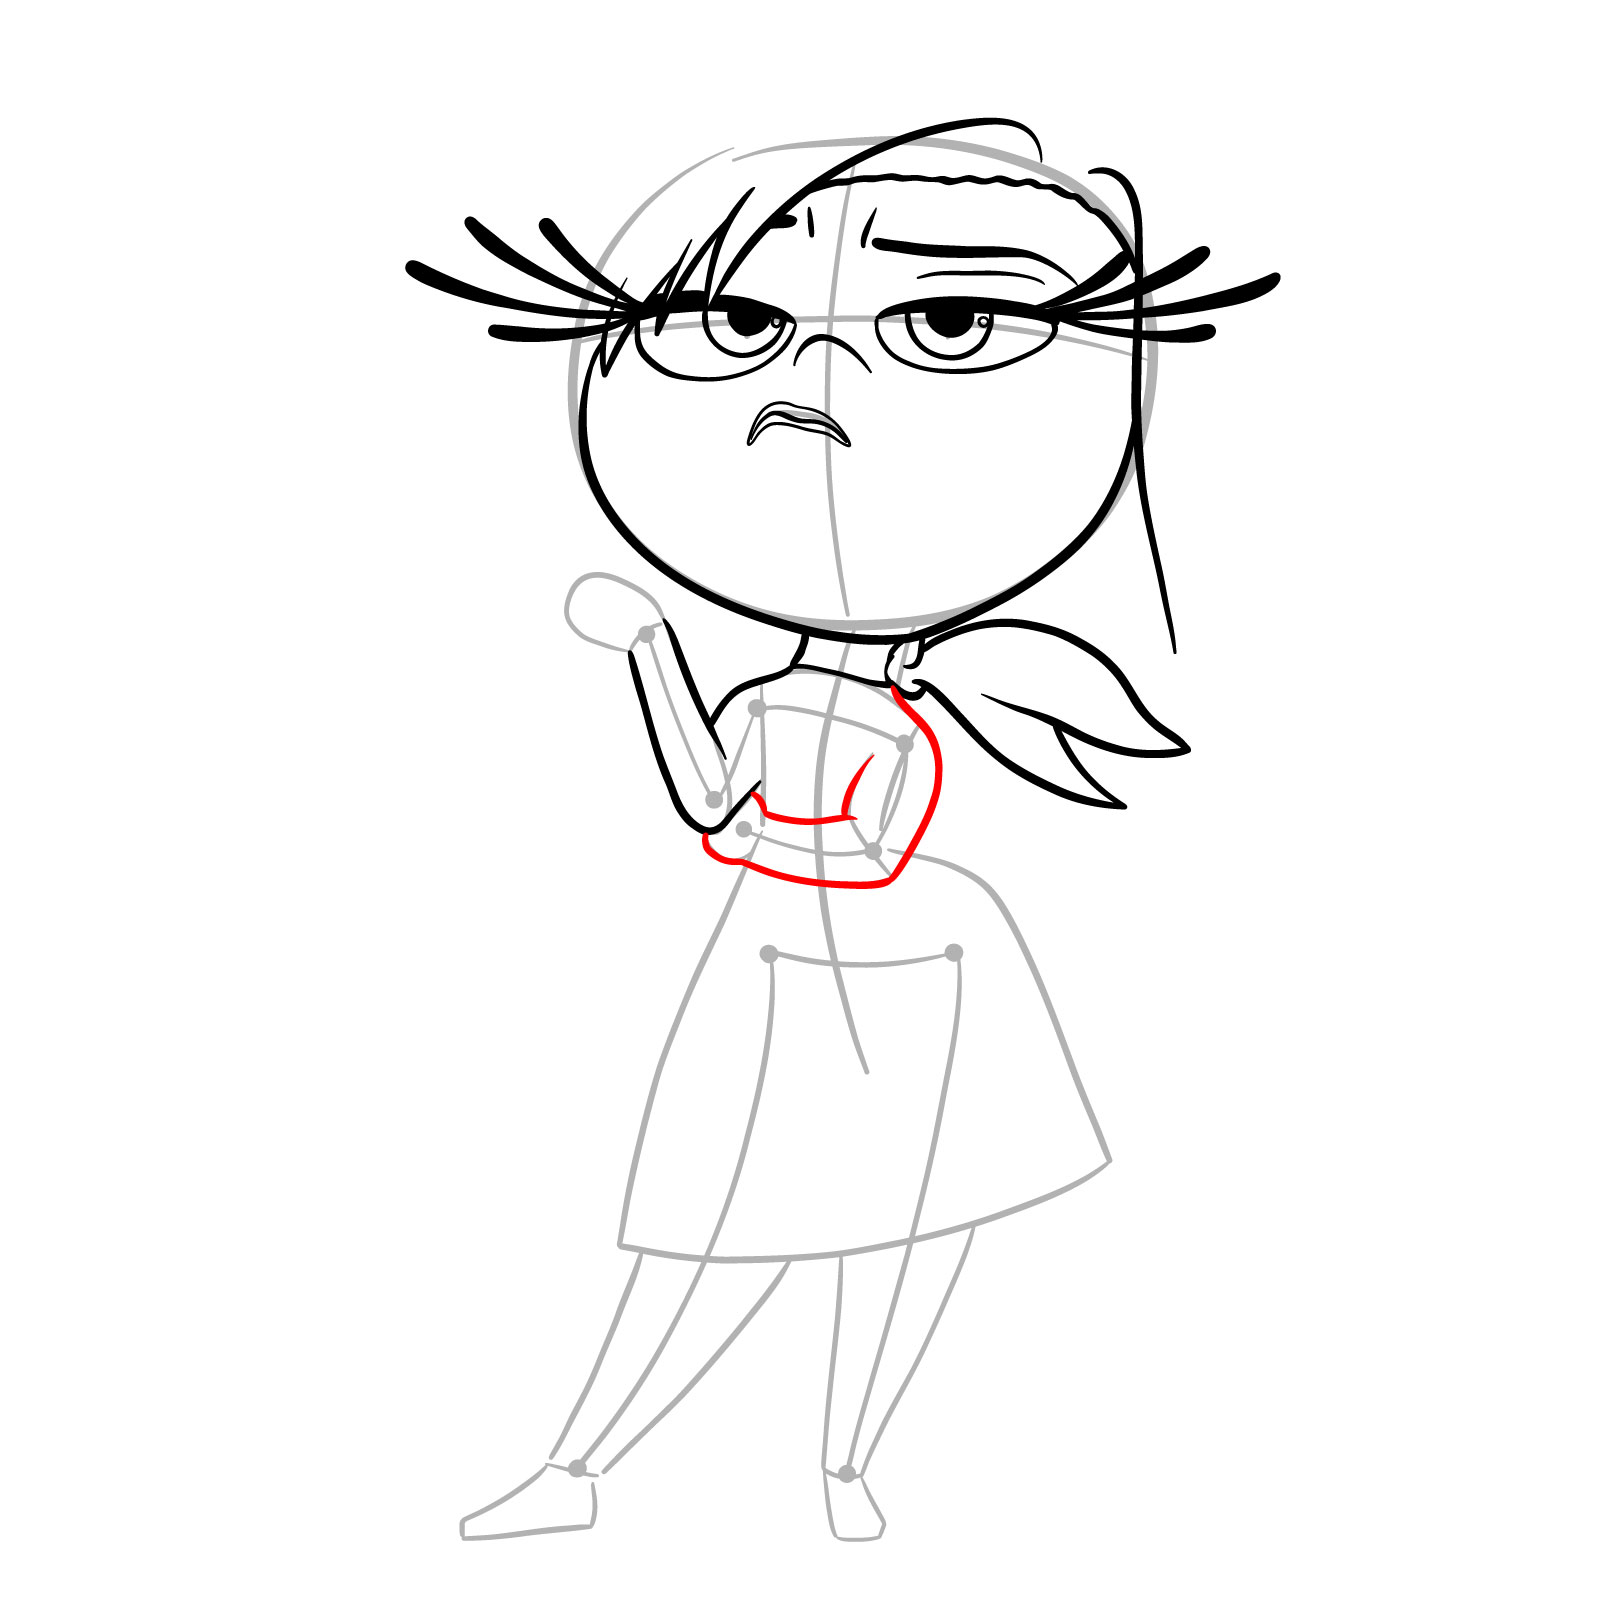 How to draw Disgust from Inside Out 2 - step 09